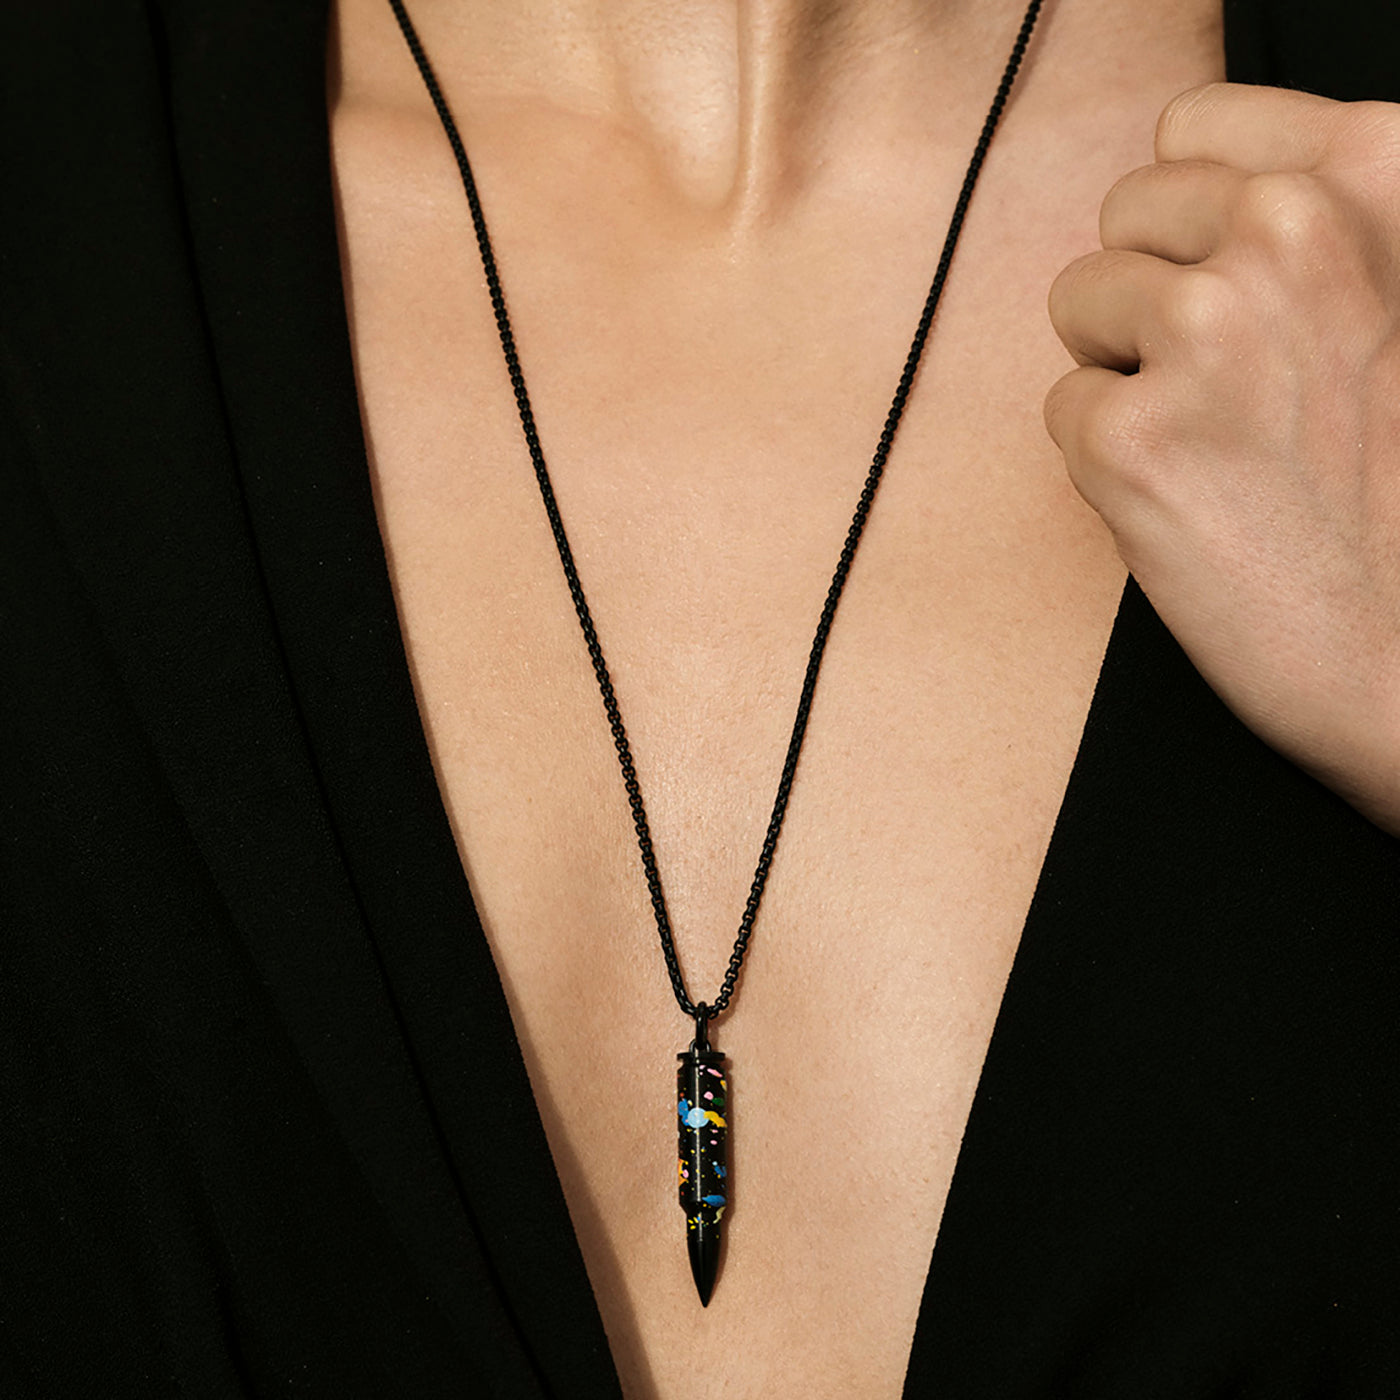 Fatal Attraction x ZoulliArt necklace